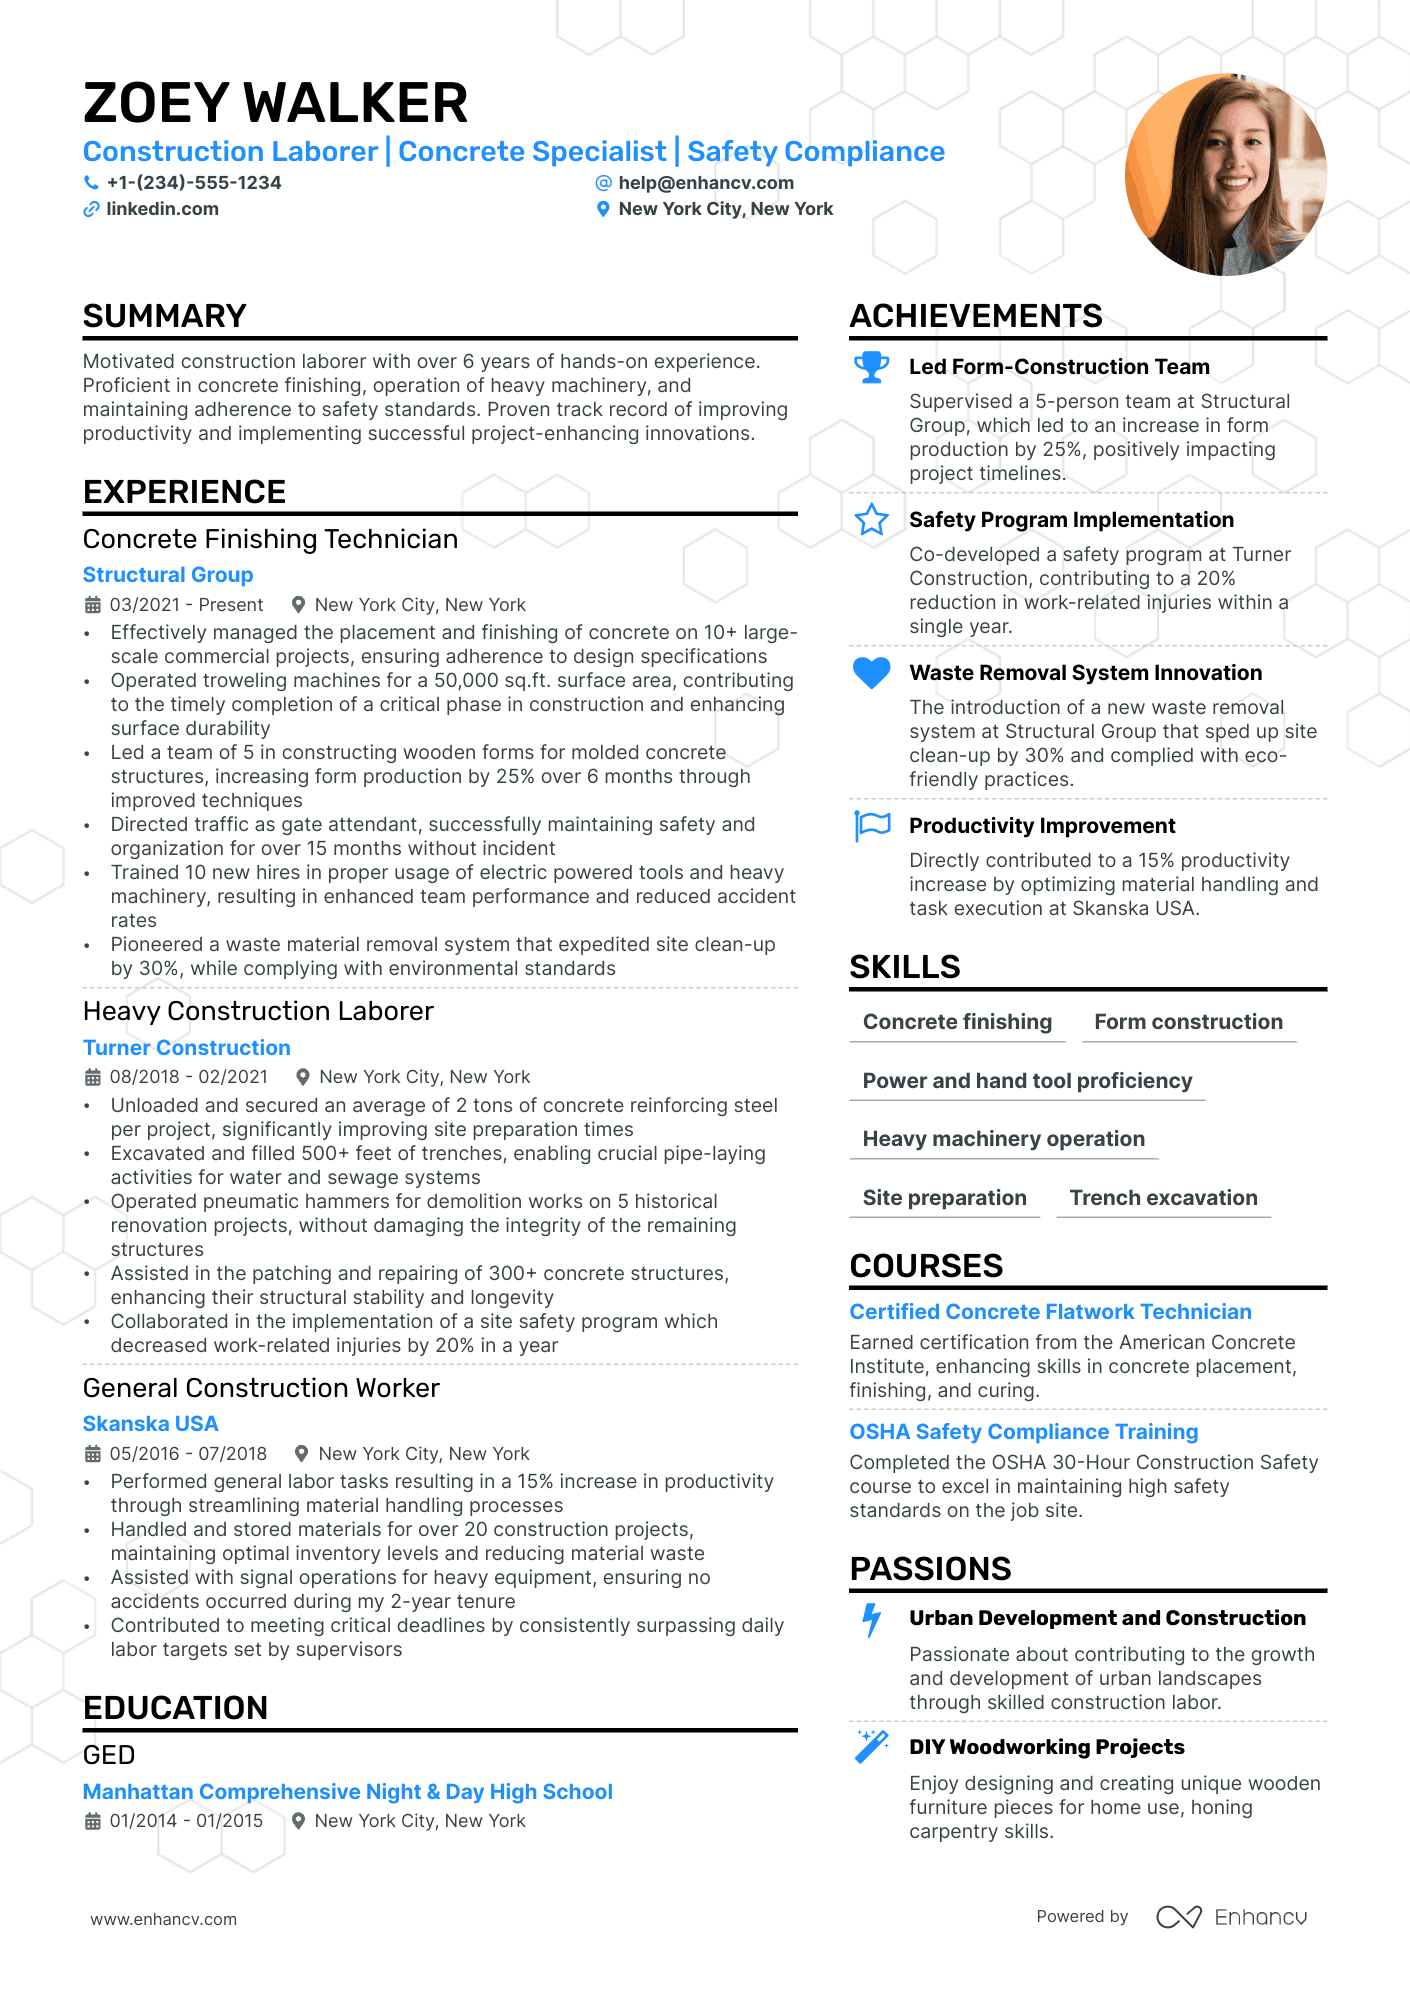 Construction Worker resume example